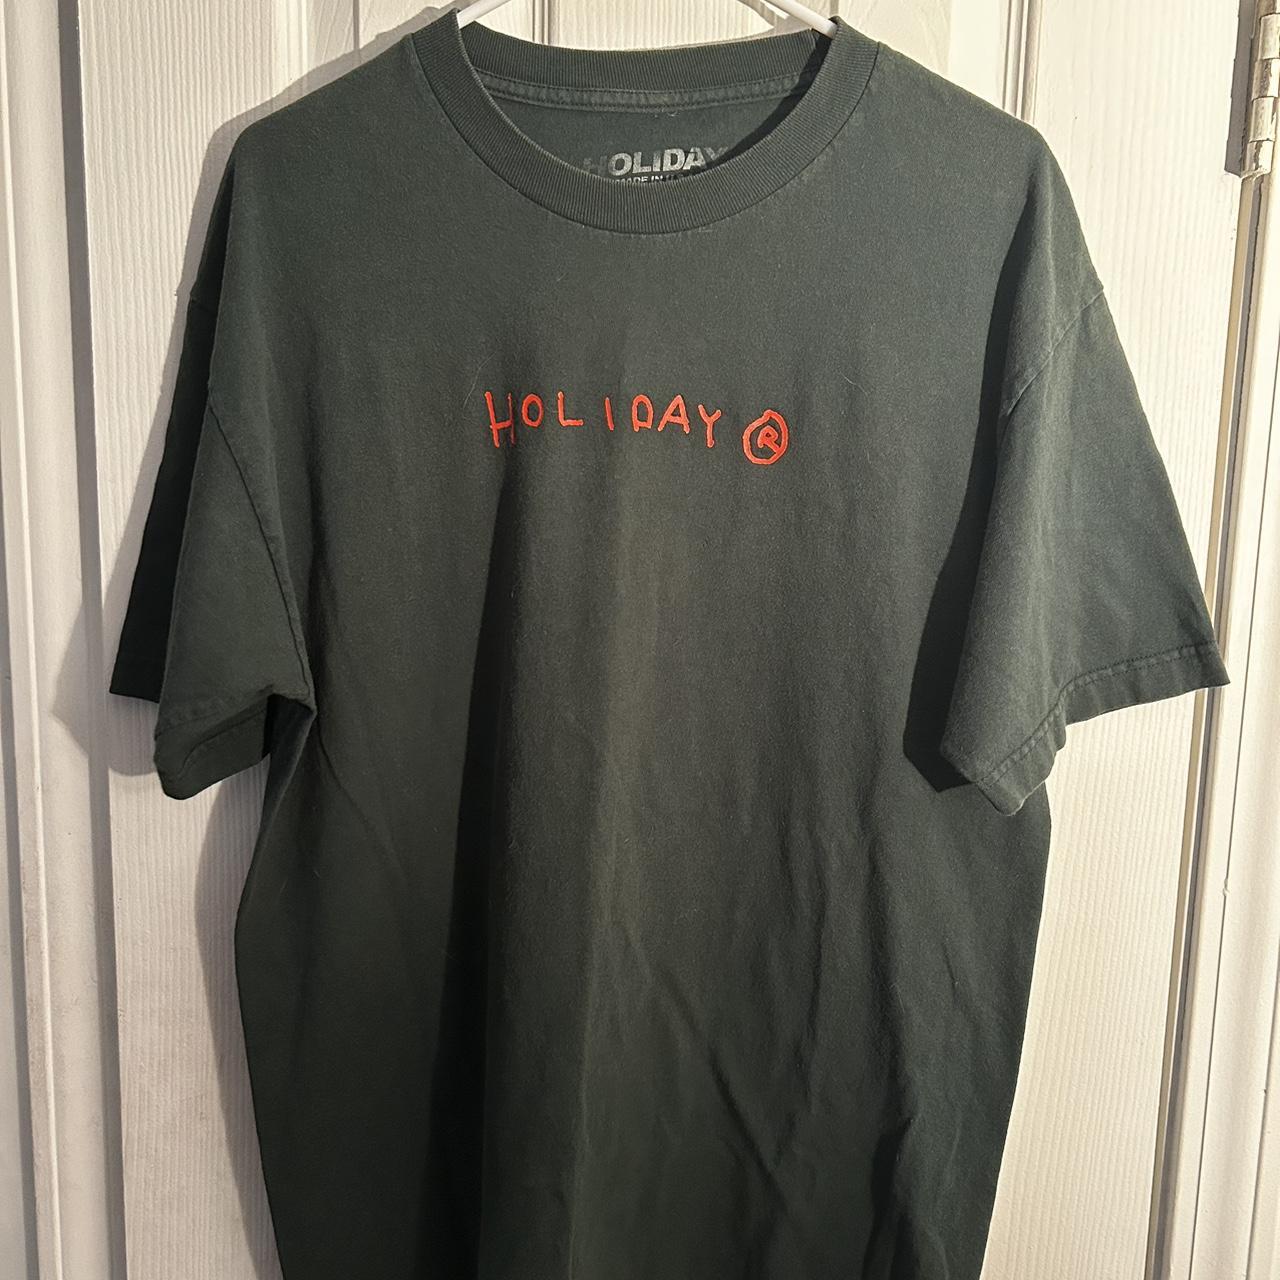 Holiday The Label Men's Green and Orange Shirt